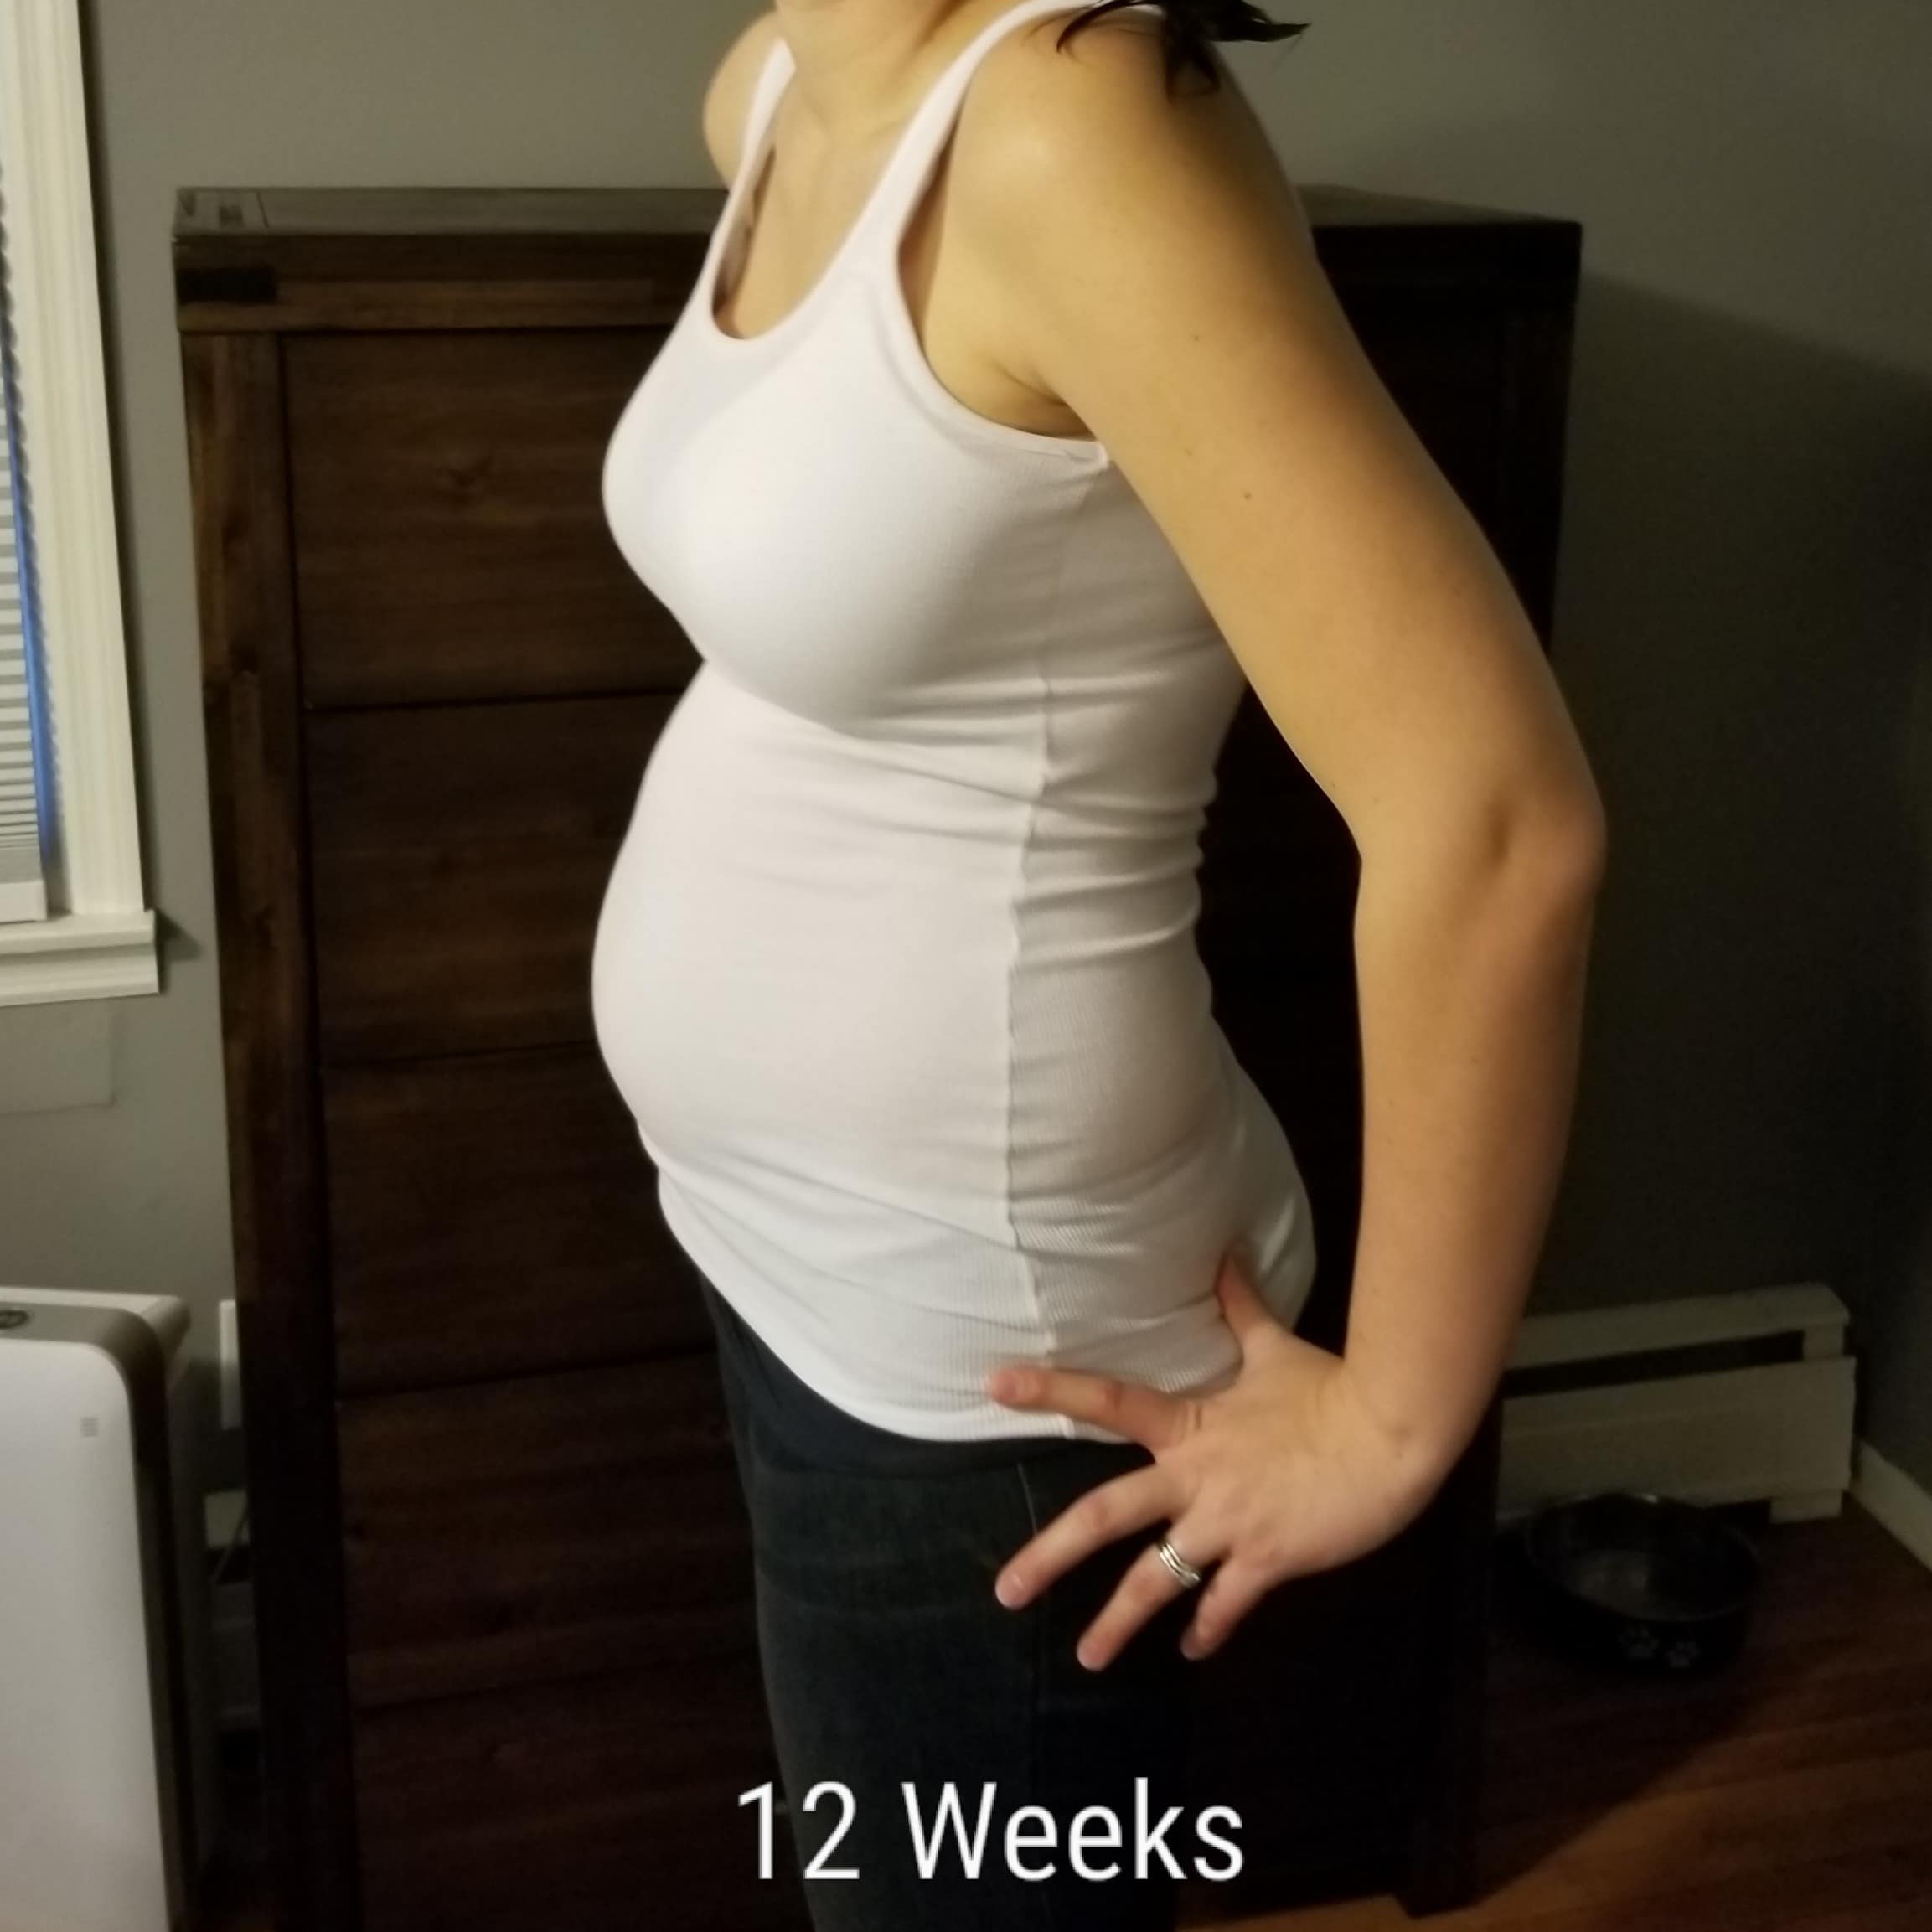 12 weeks pregnant with twins